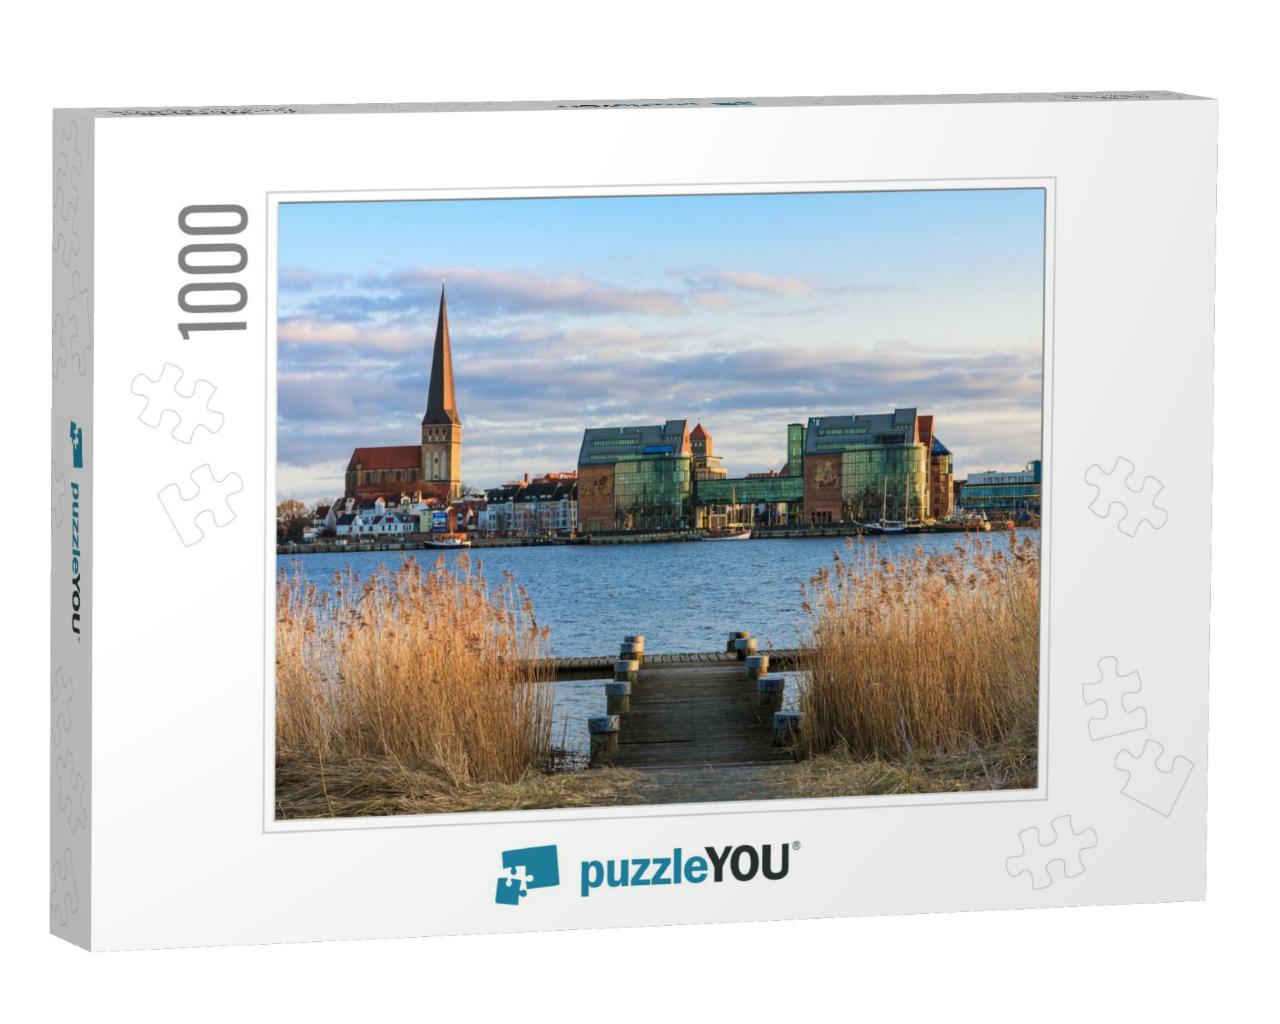 View Over the River Warnow to Rostock, Germany... Jigsaw Puzzle with 1000 pieces